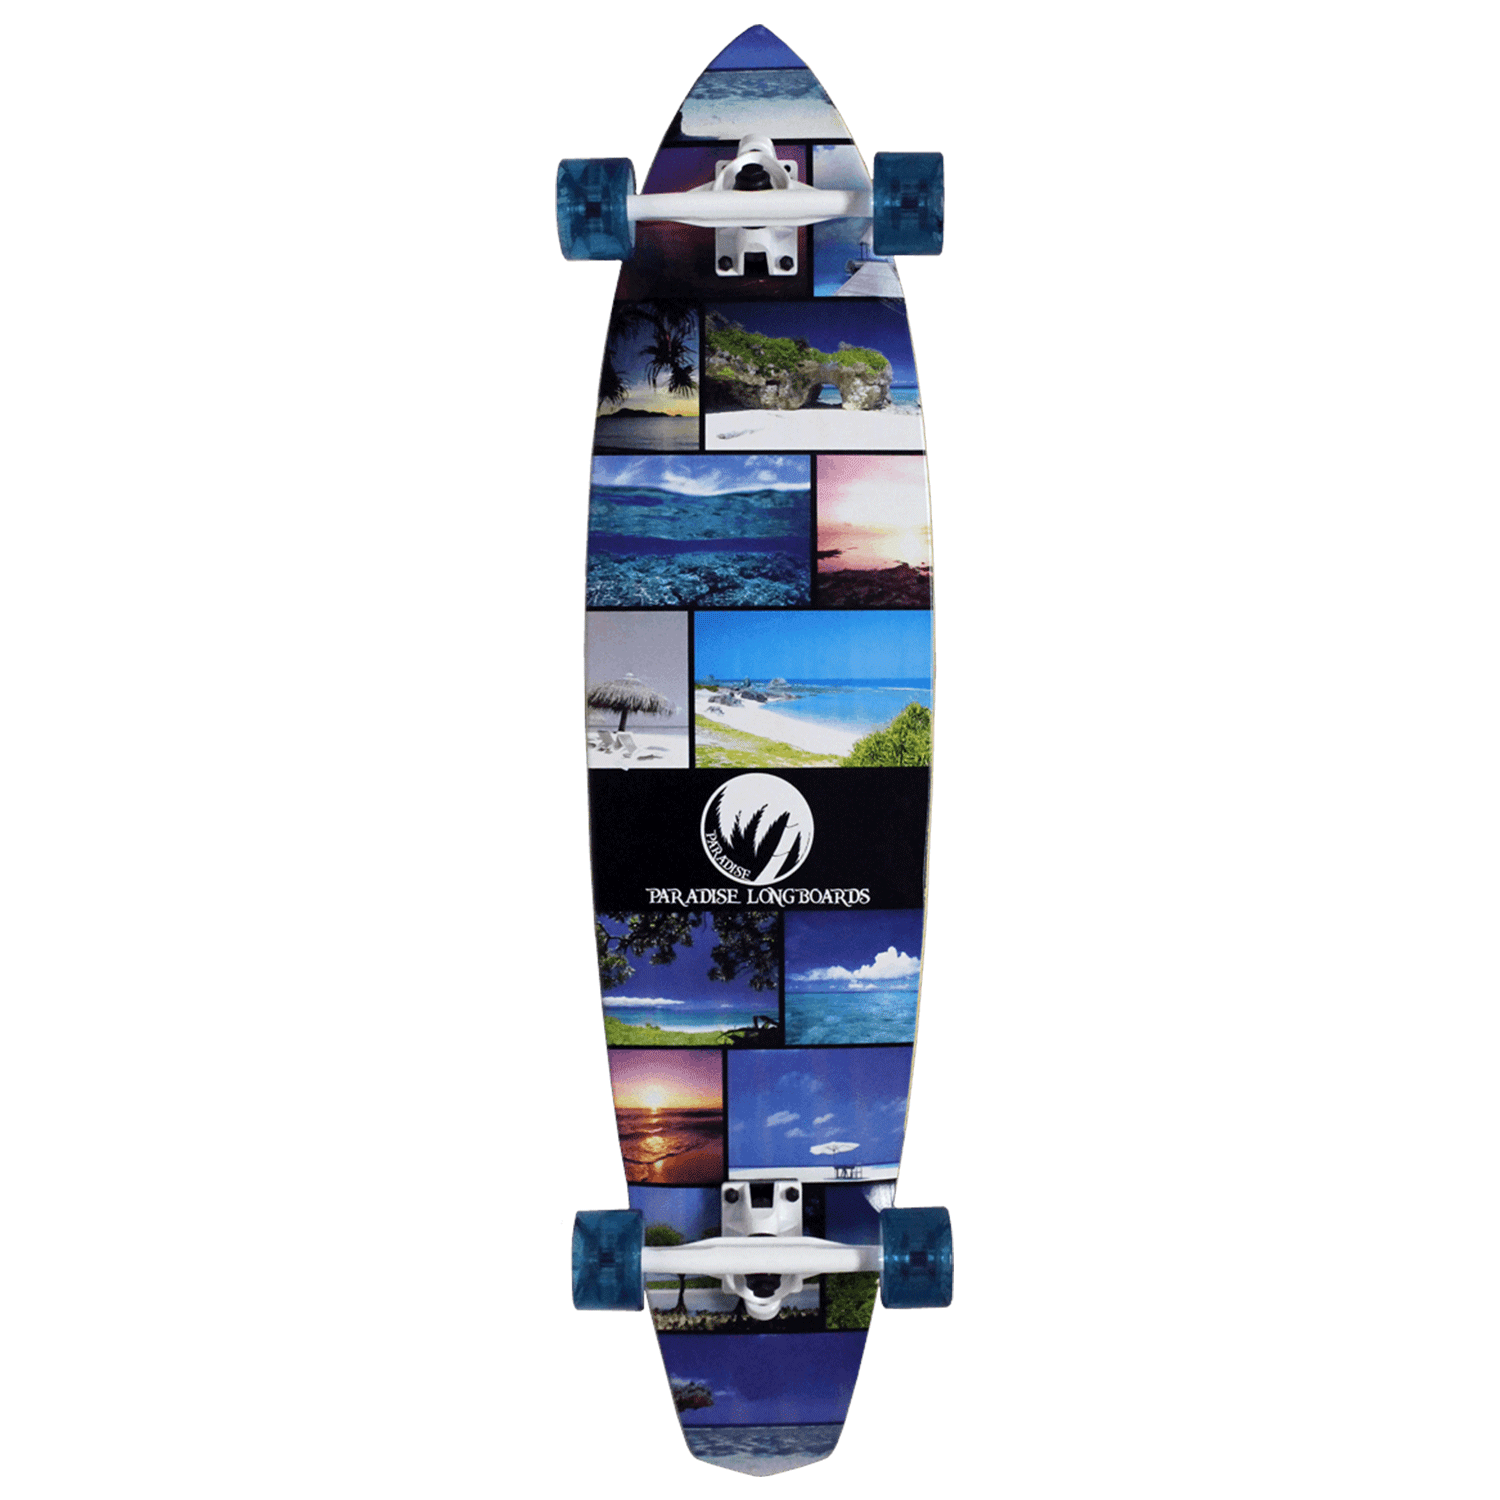 Paradise Longboard Island Life Complete 9.5in x 40.25in